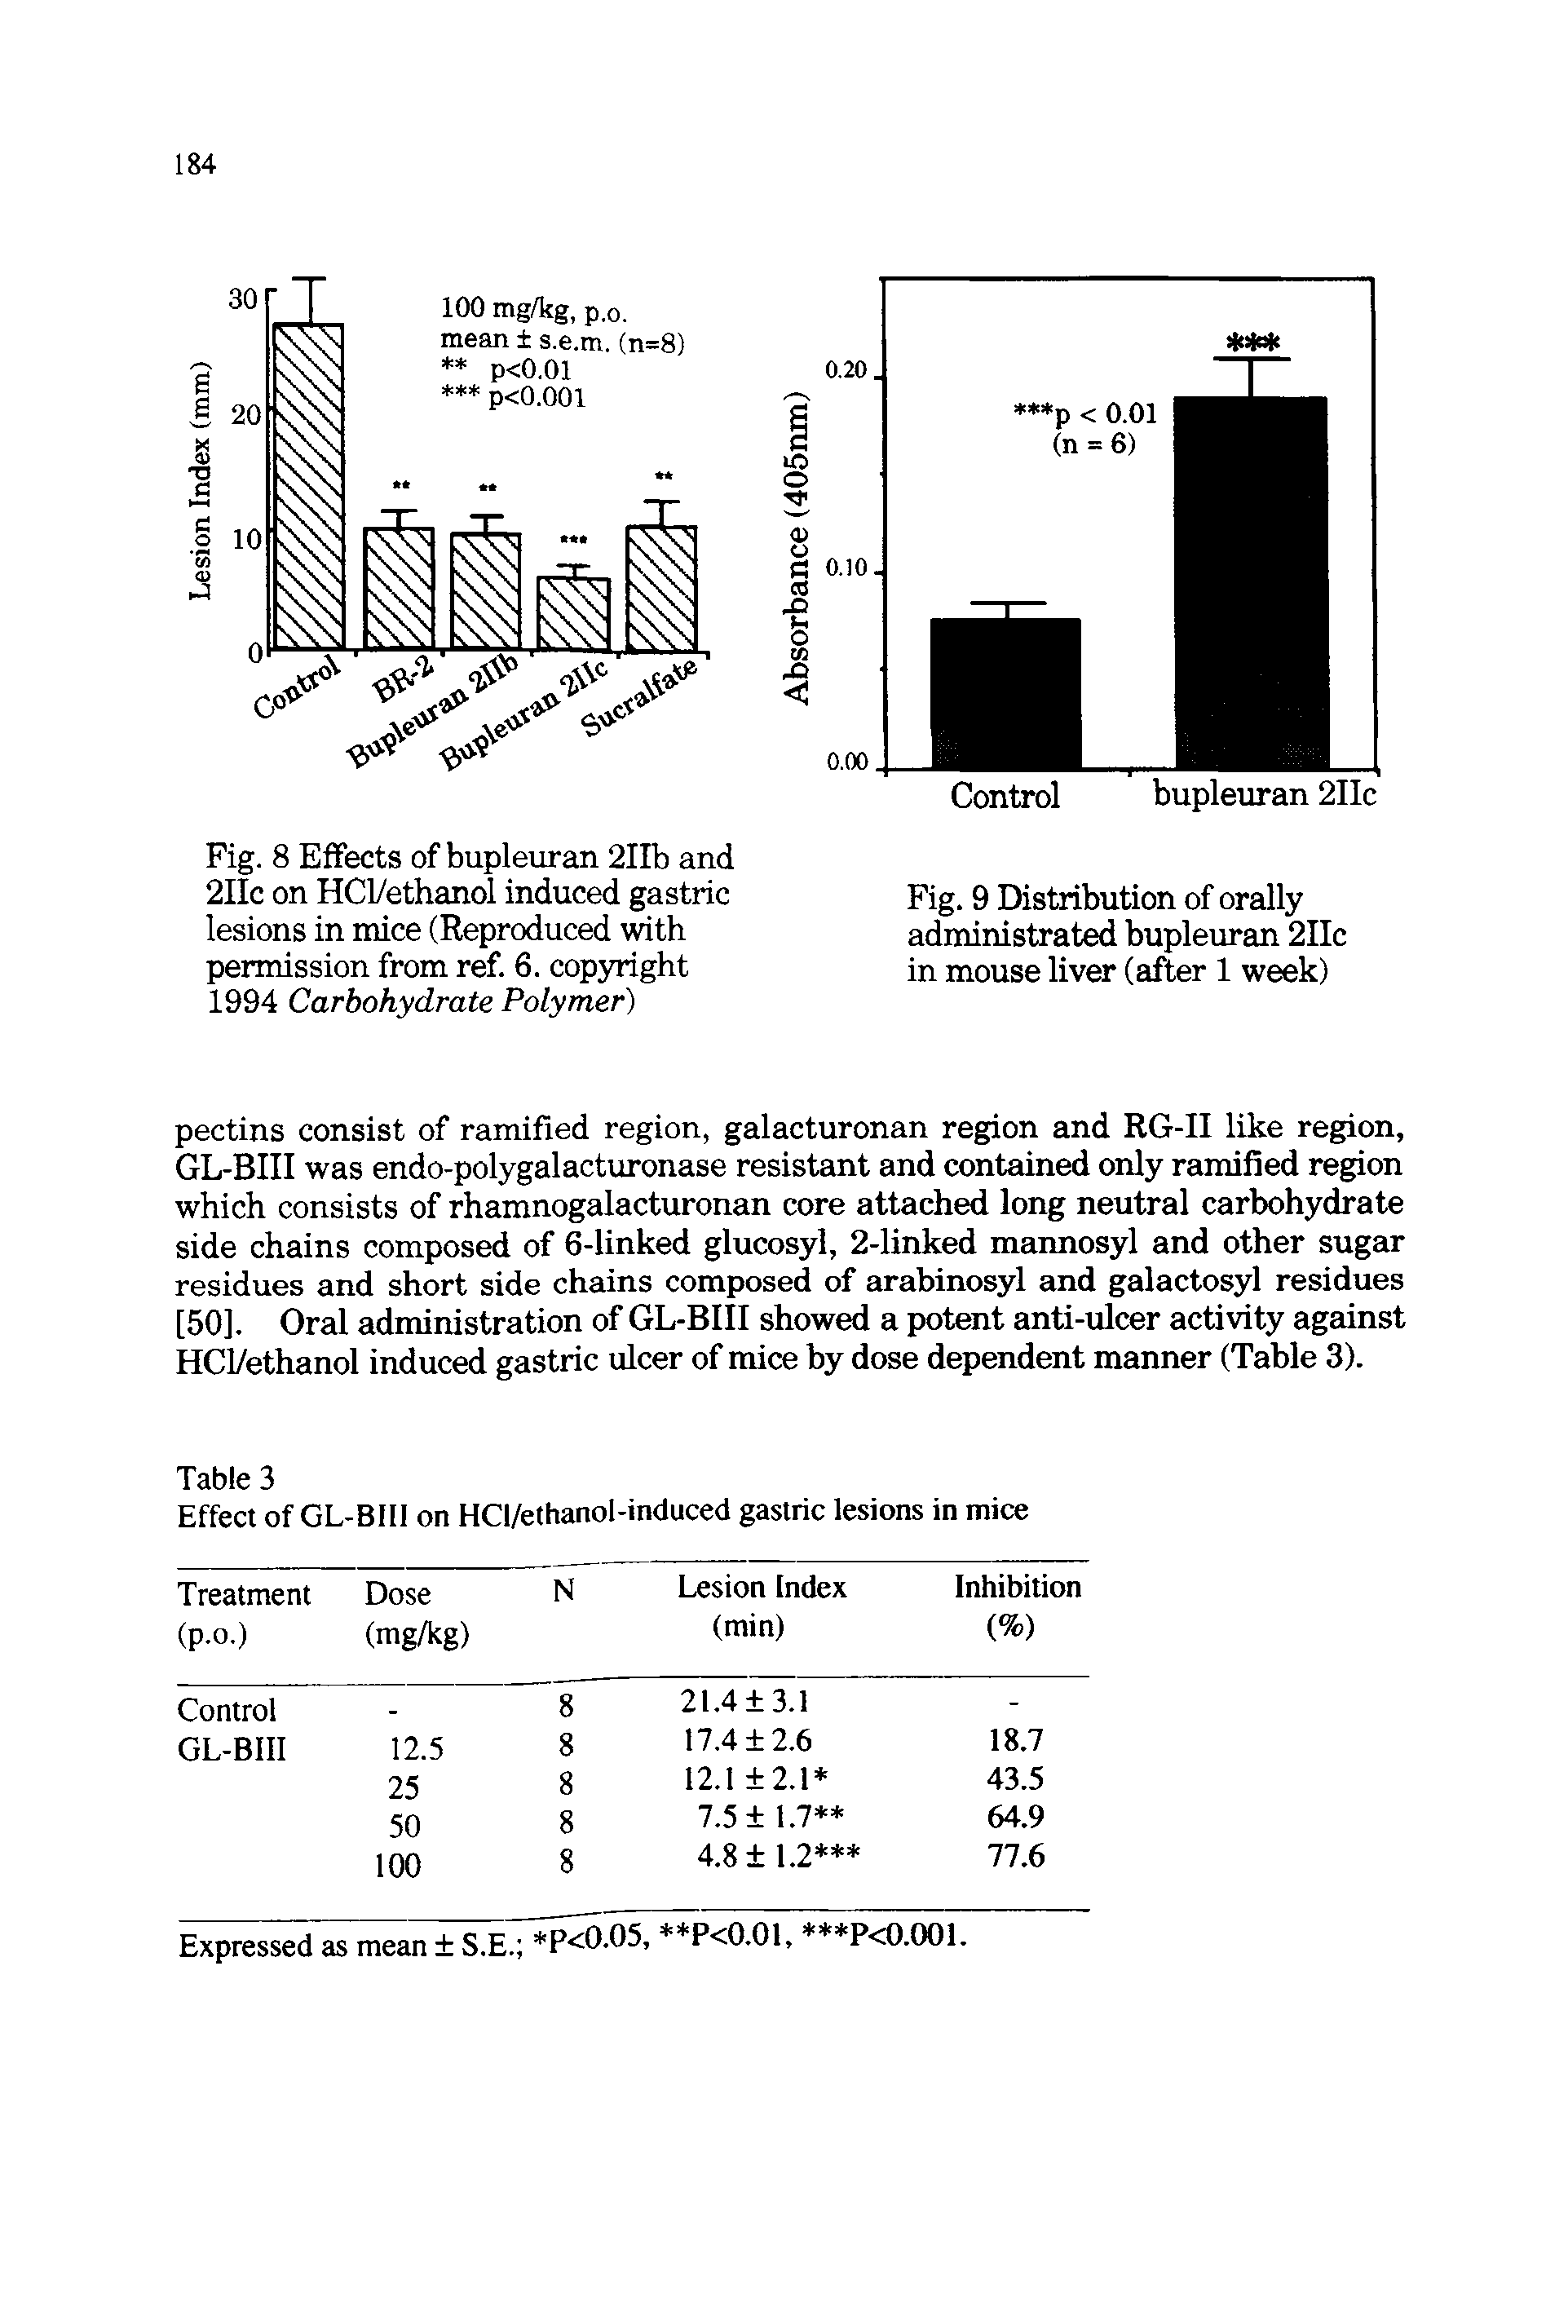 Fig. 8 Effects of bupleiiran 2IIb and 2IIc on HCl/ethanol induced gastric lesions in mice (Reproduced with permission from ref. 6. copyright 1994 Carbohydrate Polymer)...